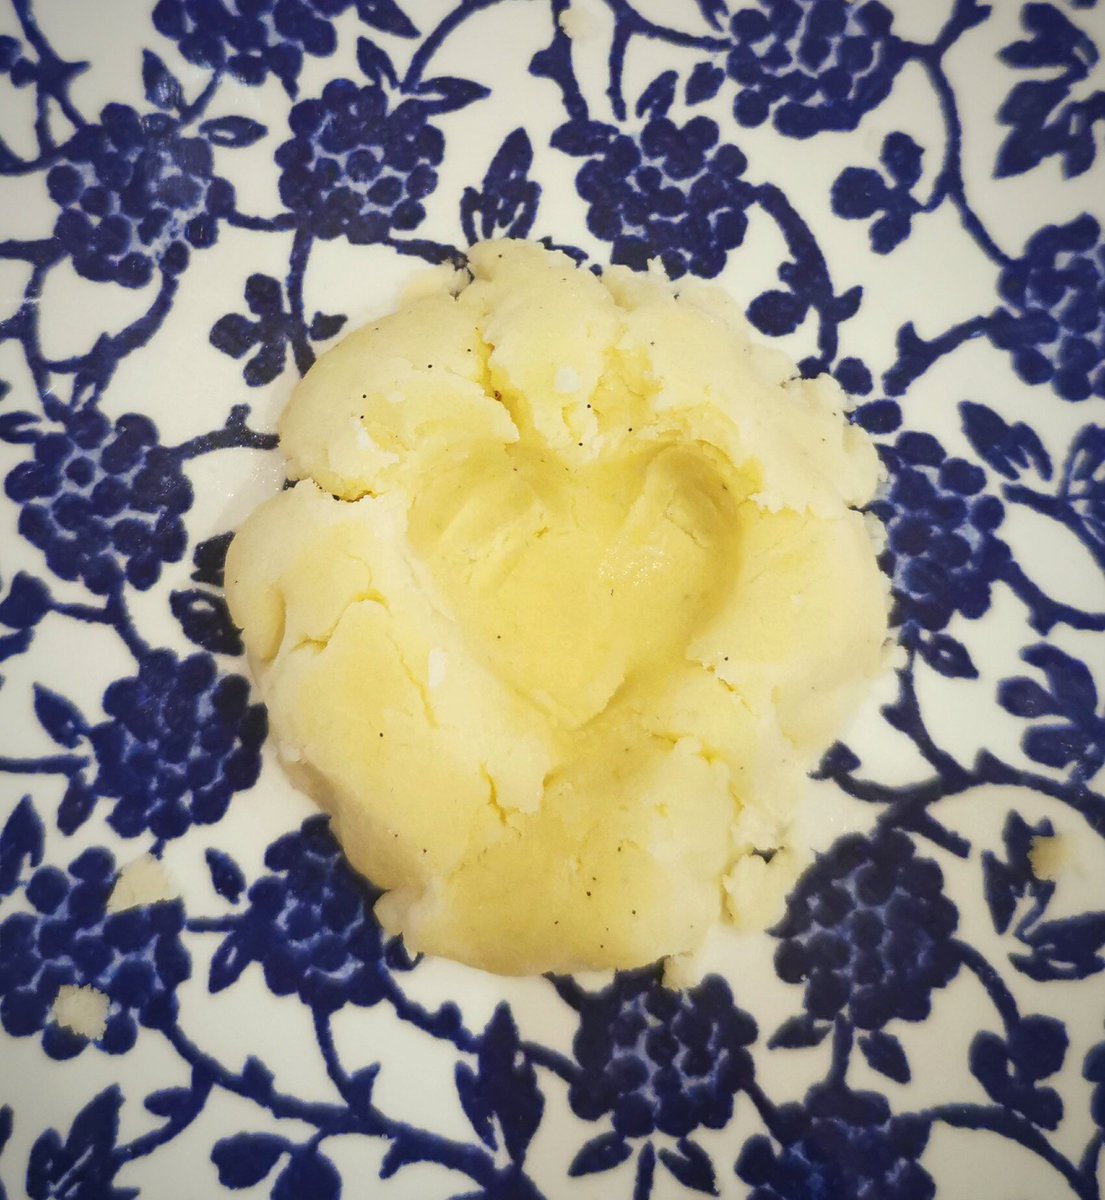 ... which is: if you haven't spent your life collecting an entire cupboard full of cookie cutters, you can make lovely Thumb Print Biscuits instead. And small fingers can easily make the thumb prints into heart shapes too, like this: